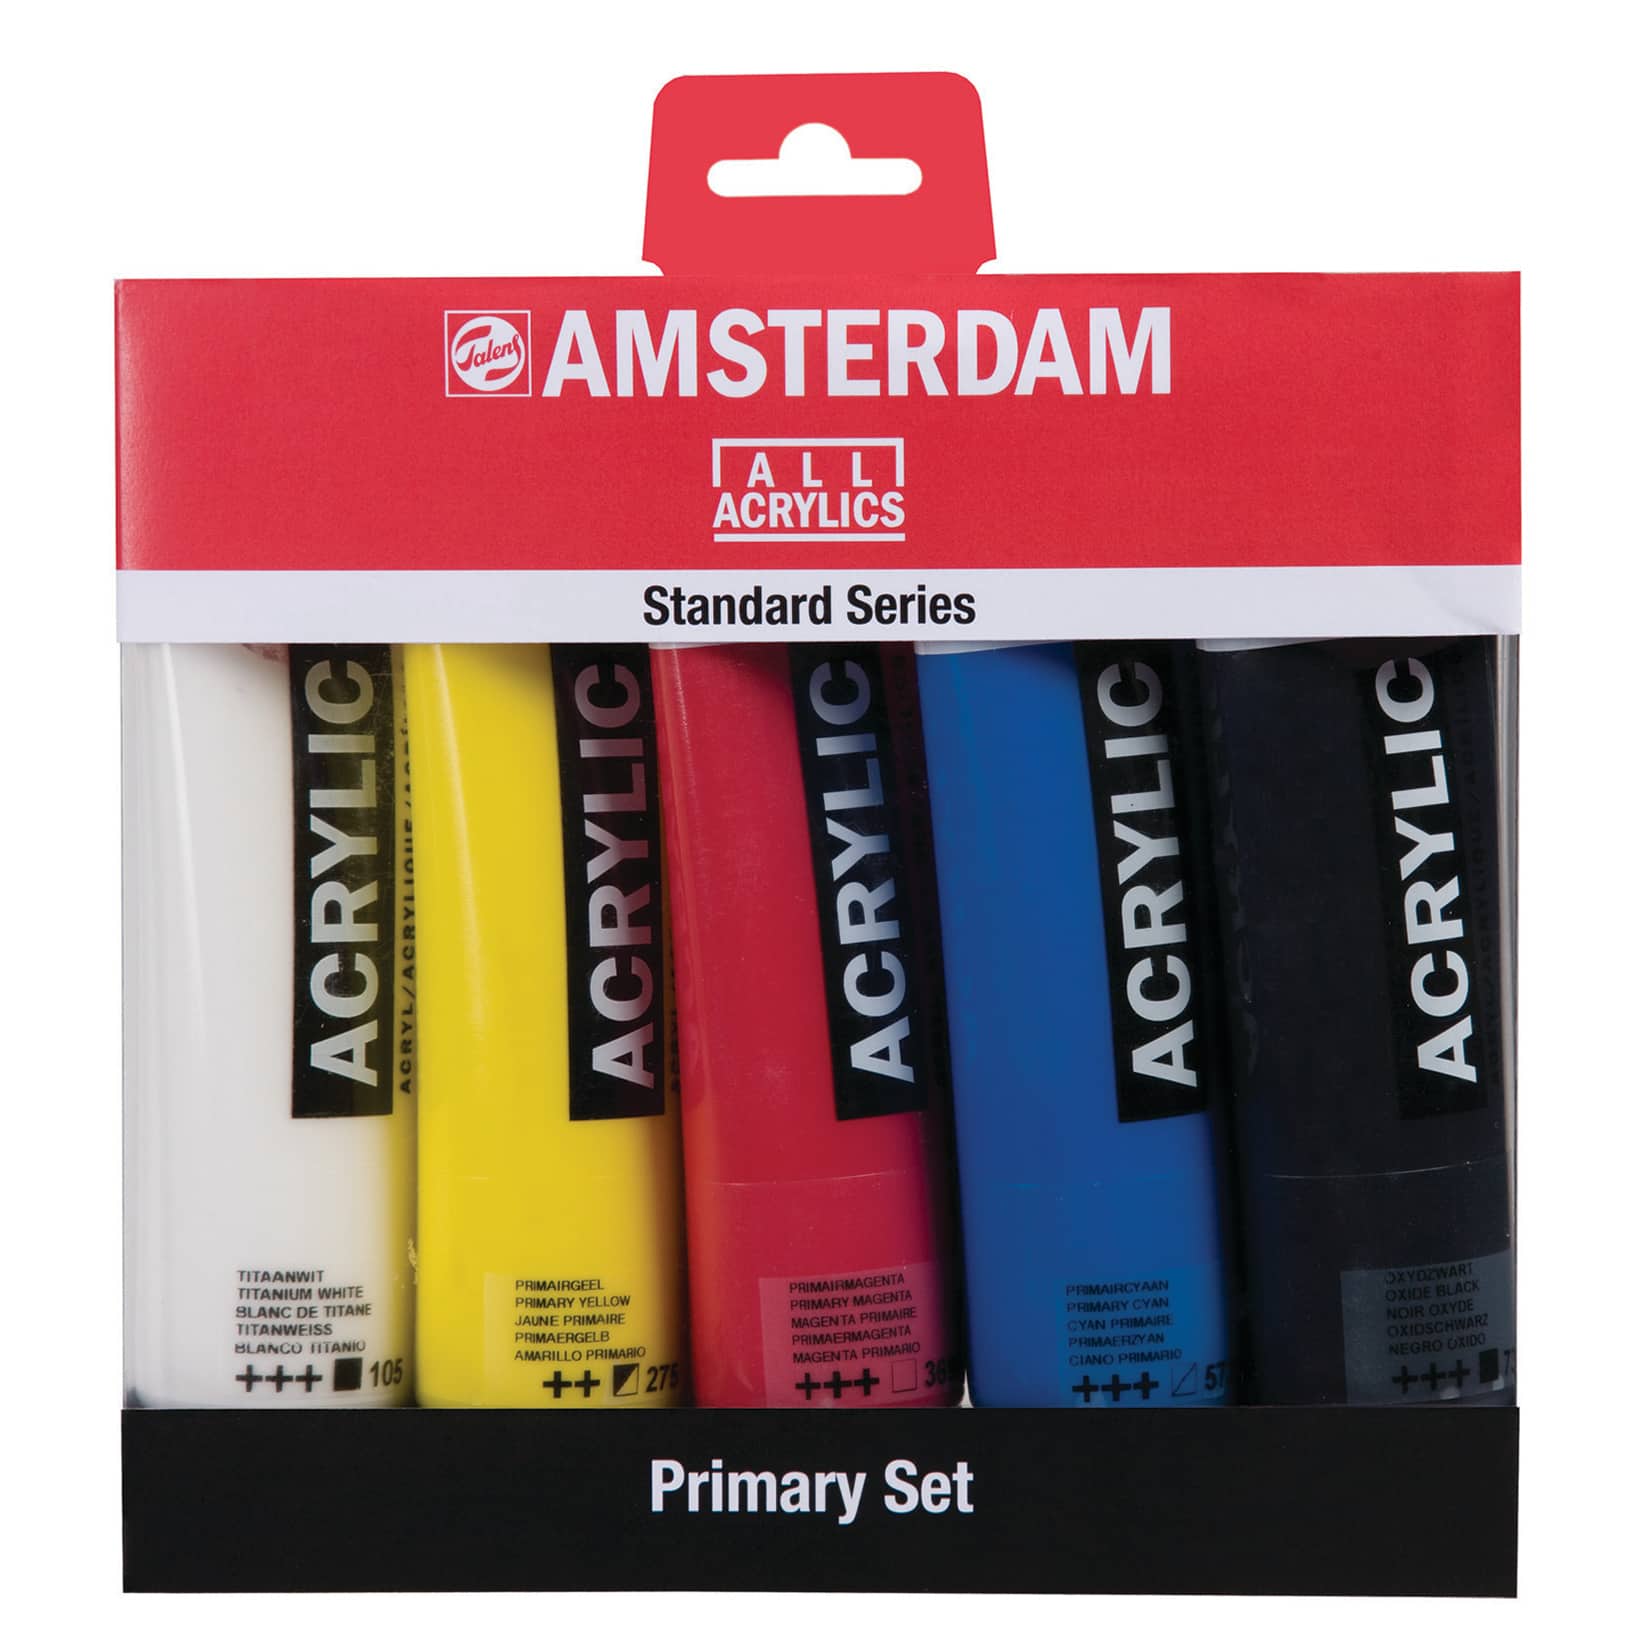 Amsterdam Standard Acrylic Paint, 5 Color Primary Set